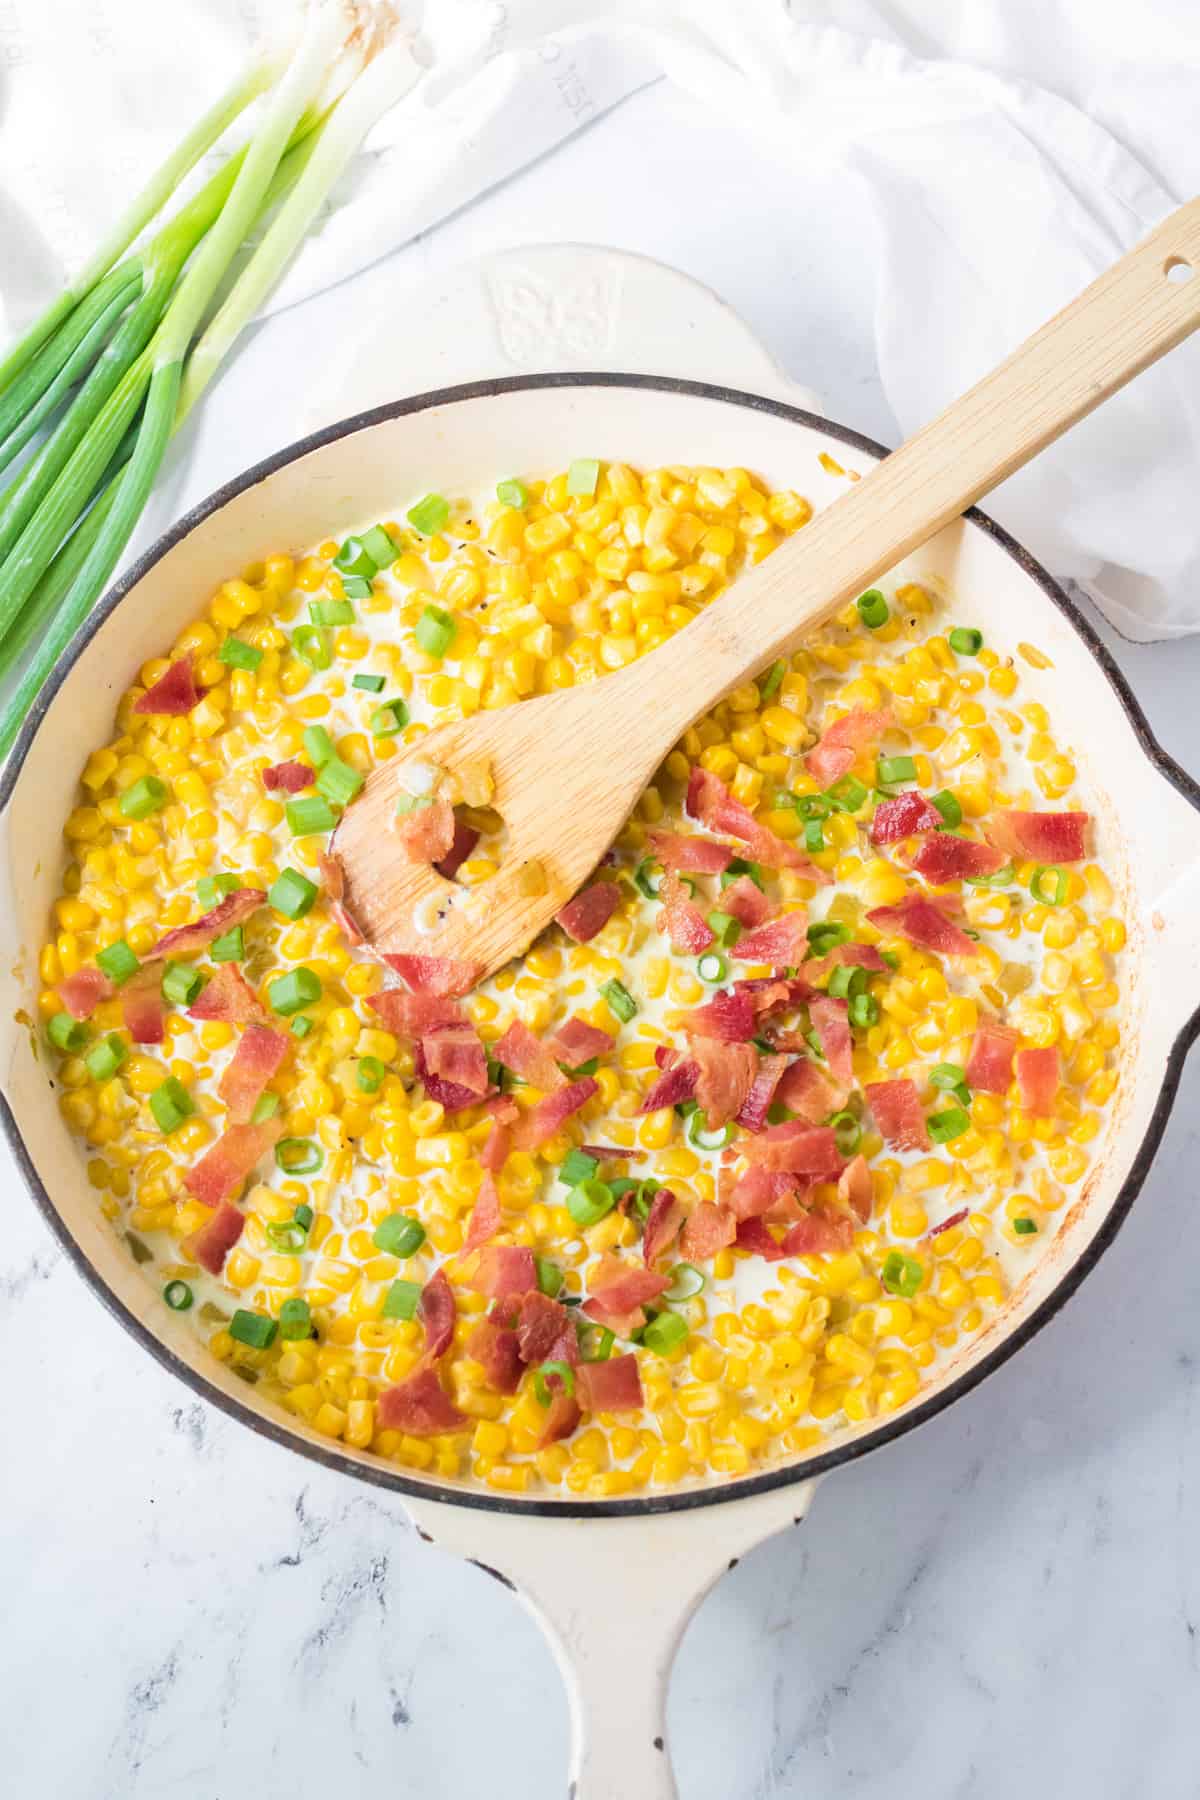 add the bacon and heavy cream to the corn